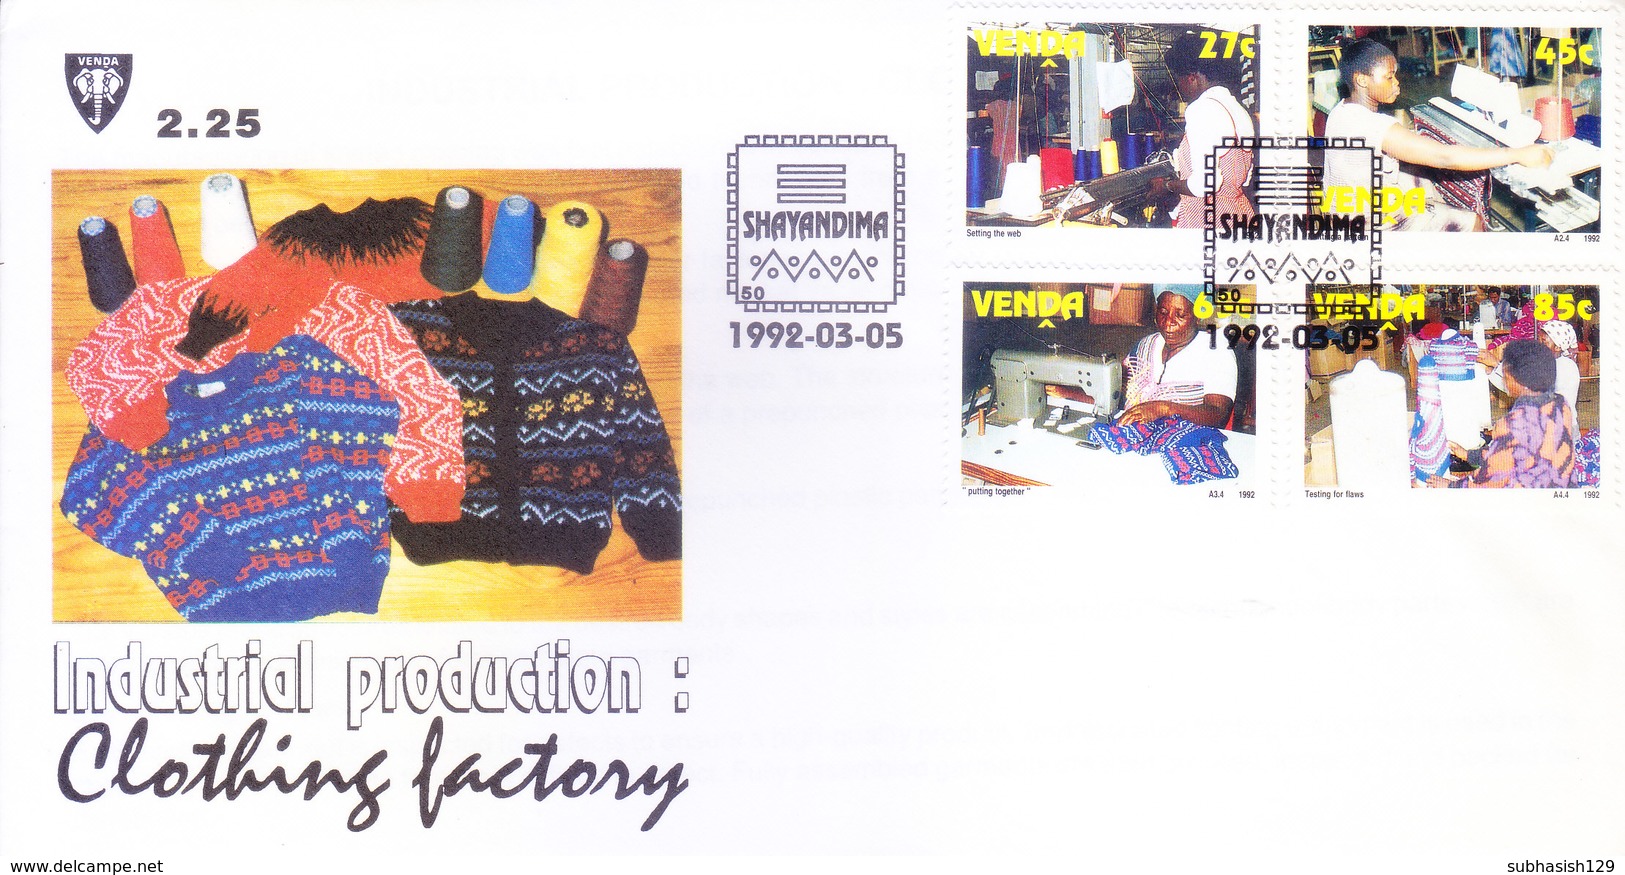 VENDA / SOUTH AFRICA : FIRST DAY COVER WITH INFORMATION BROCHURE INSIDE : INDUSTRIAL PRODUCTION - CLOTHING : 05-03-1992 - Bophuthatswana